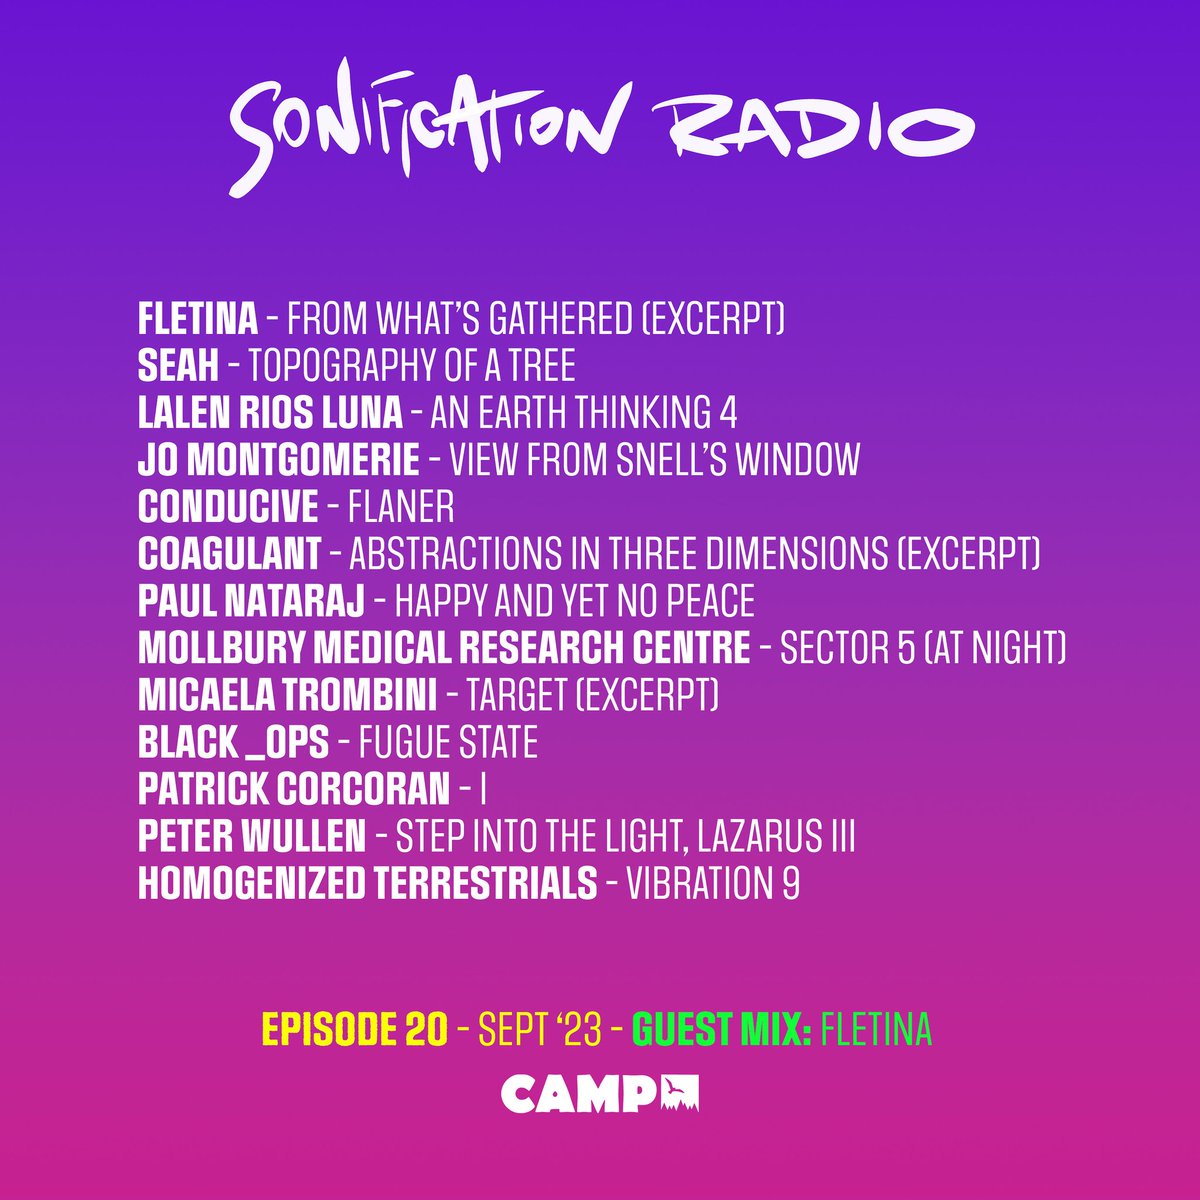 I had the great honour and privilege to have been asked to contribute a guest mix for @devinsarno's Sonification radio show. I had such a blast compiling and sequencing this mix. I love it. Here's the link, if you want to check it out... mixcloud.com/camp_fr/sonifi…